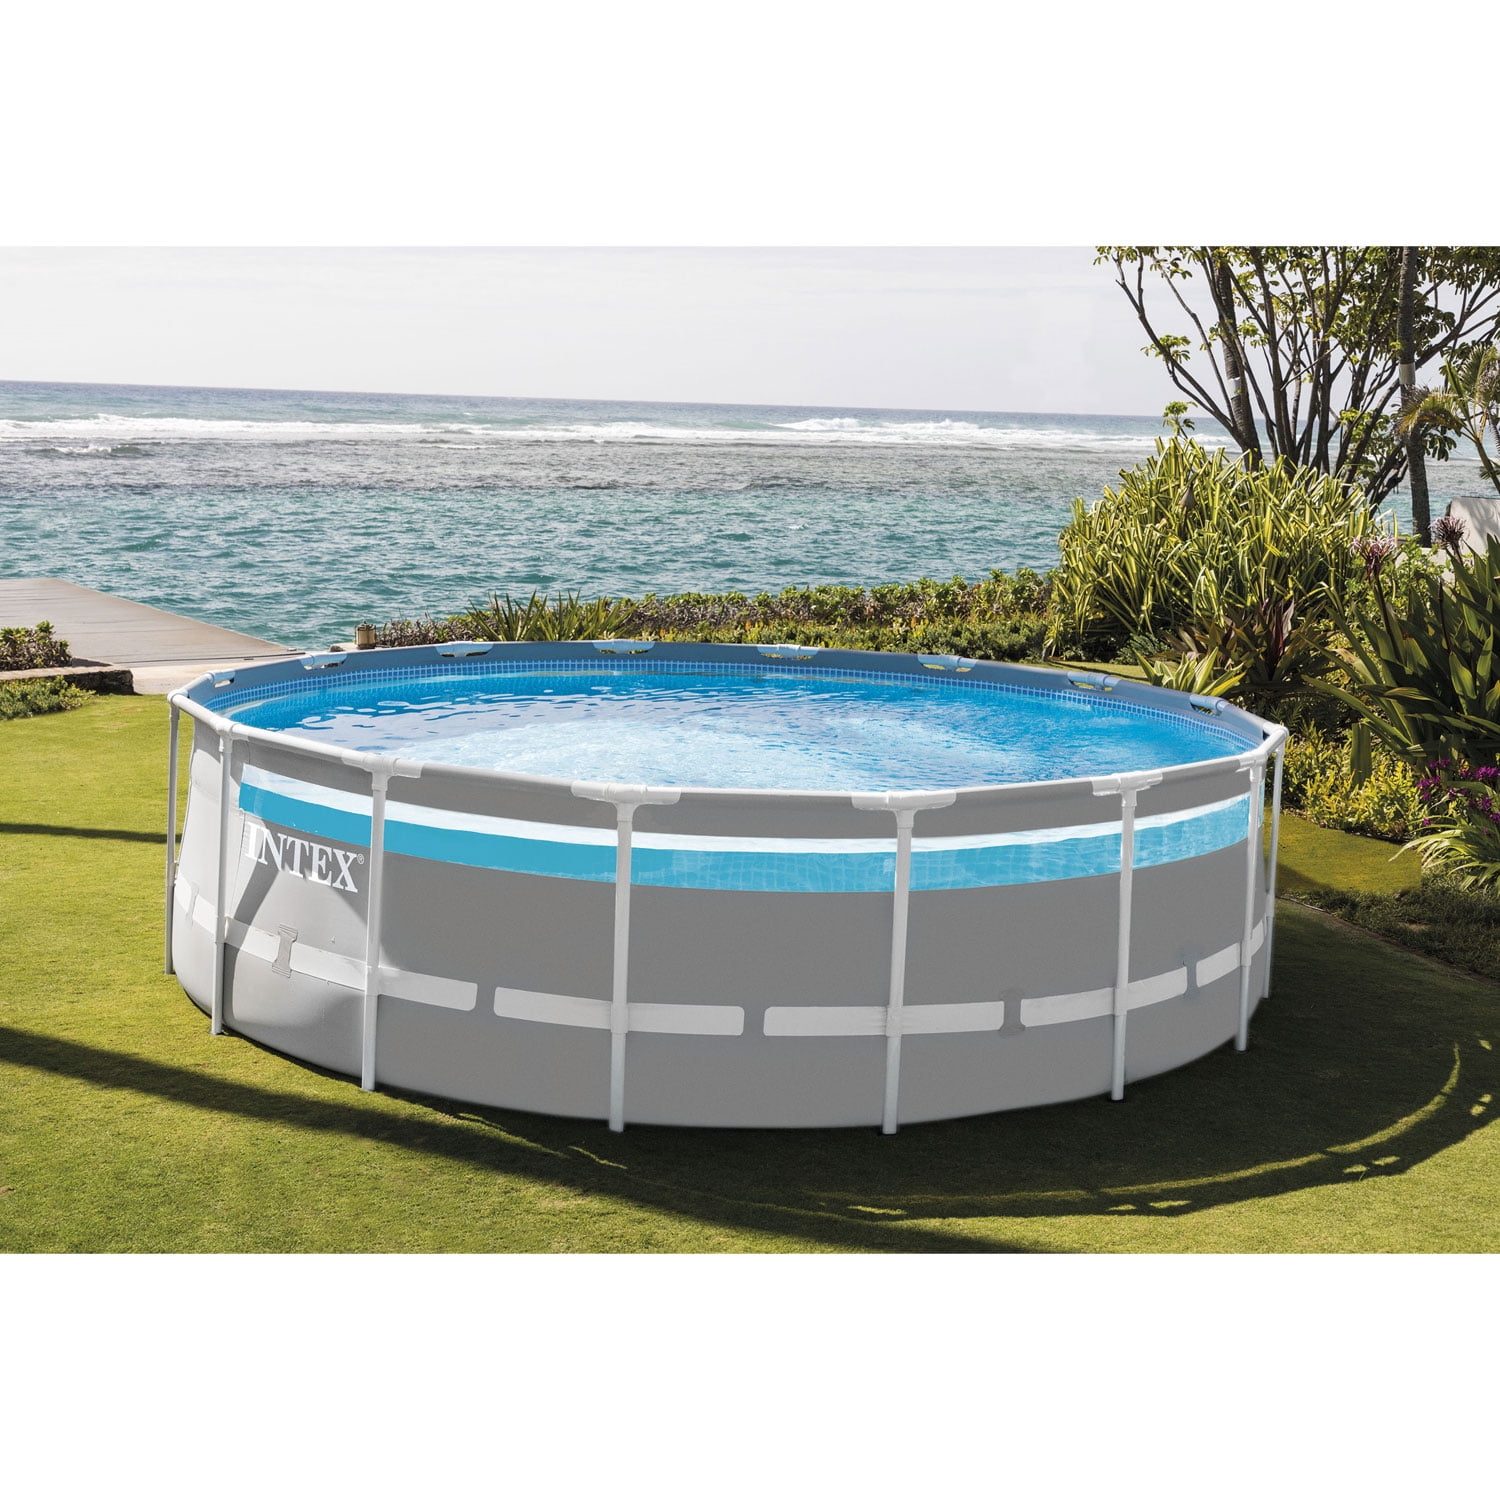 Intex 26729EH 16ft x 48in Clearview Prism Above Swimming Pool w/Pump - Walmart.com